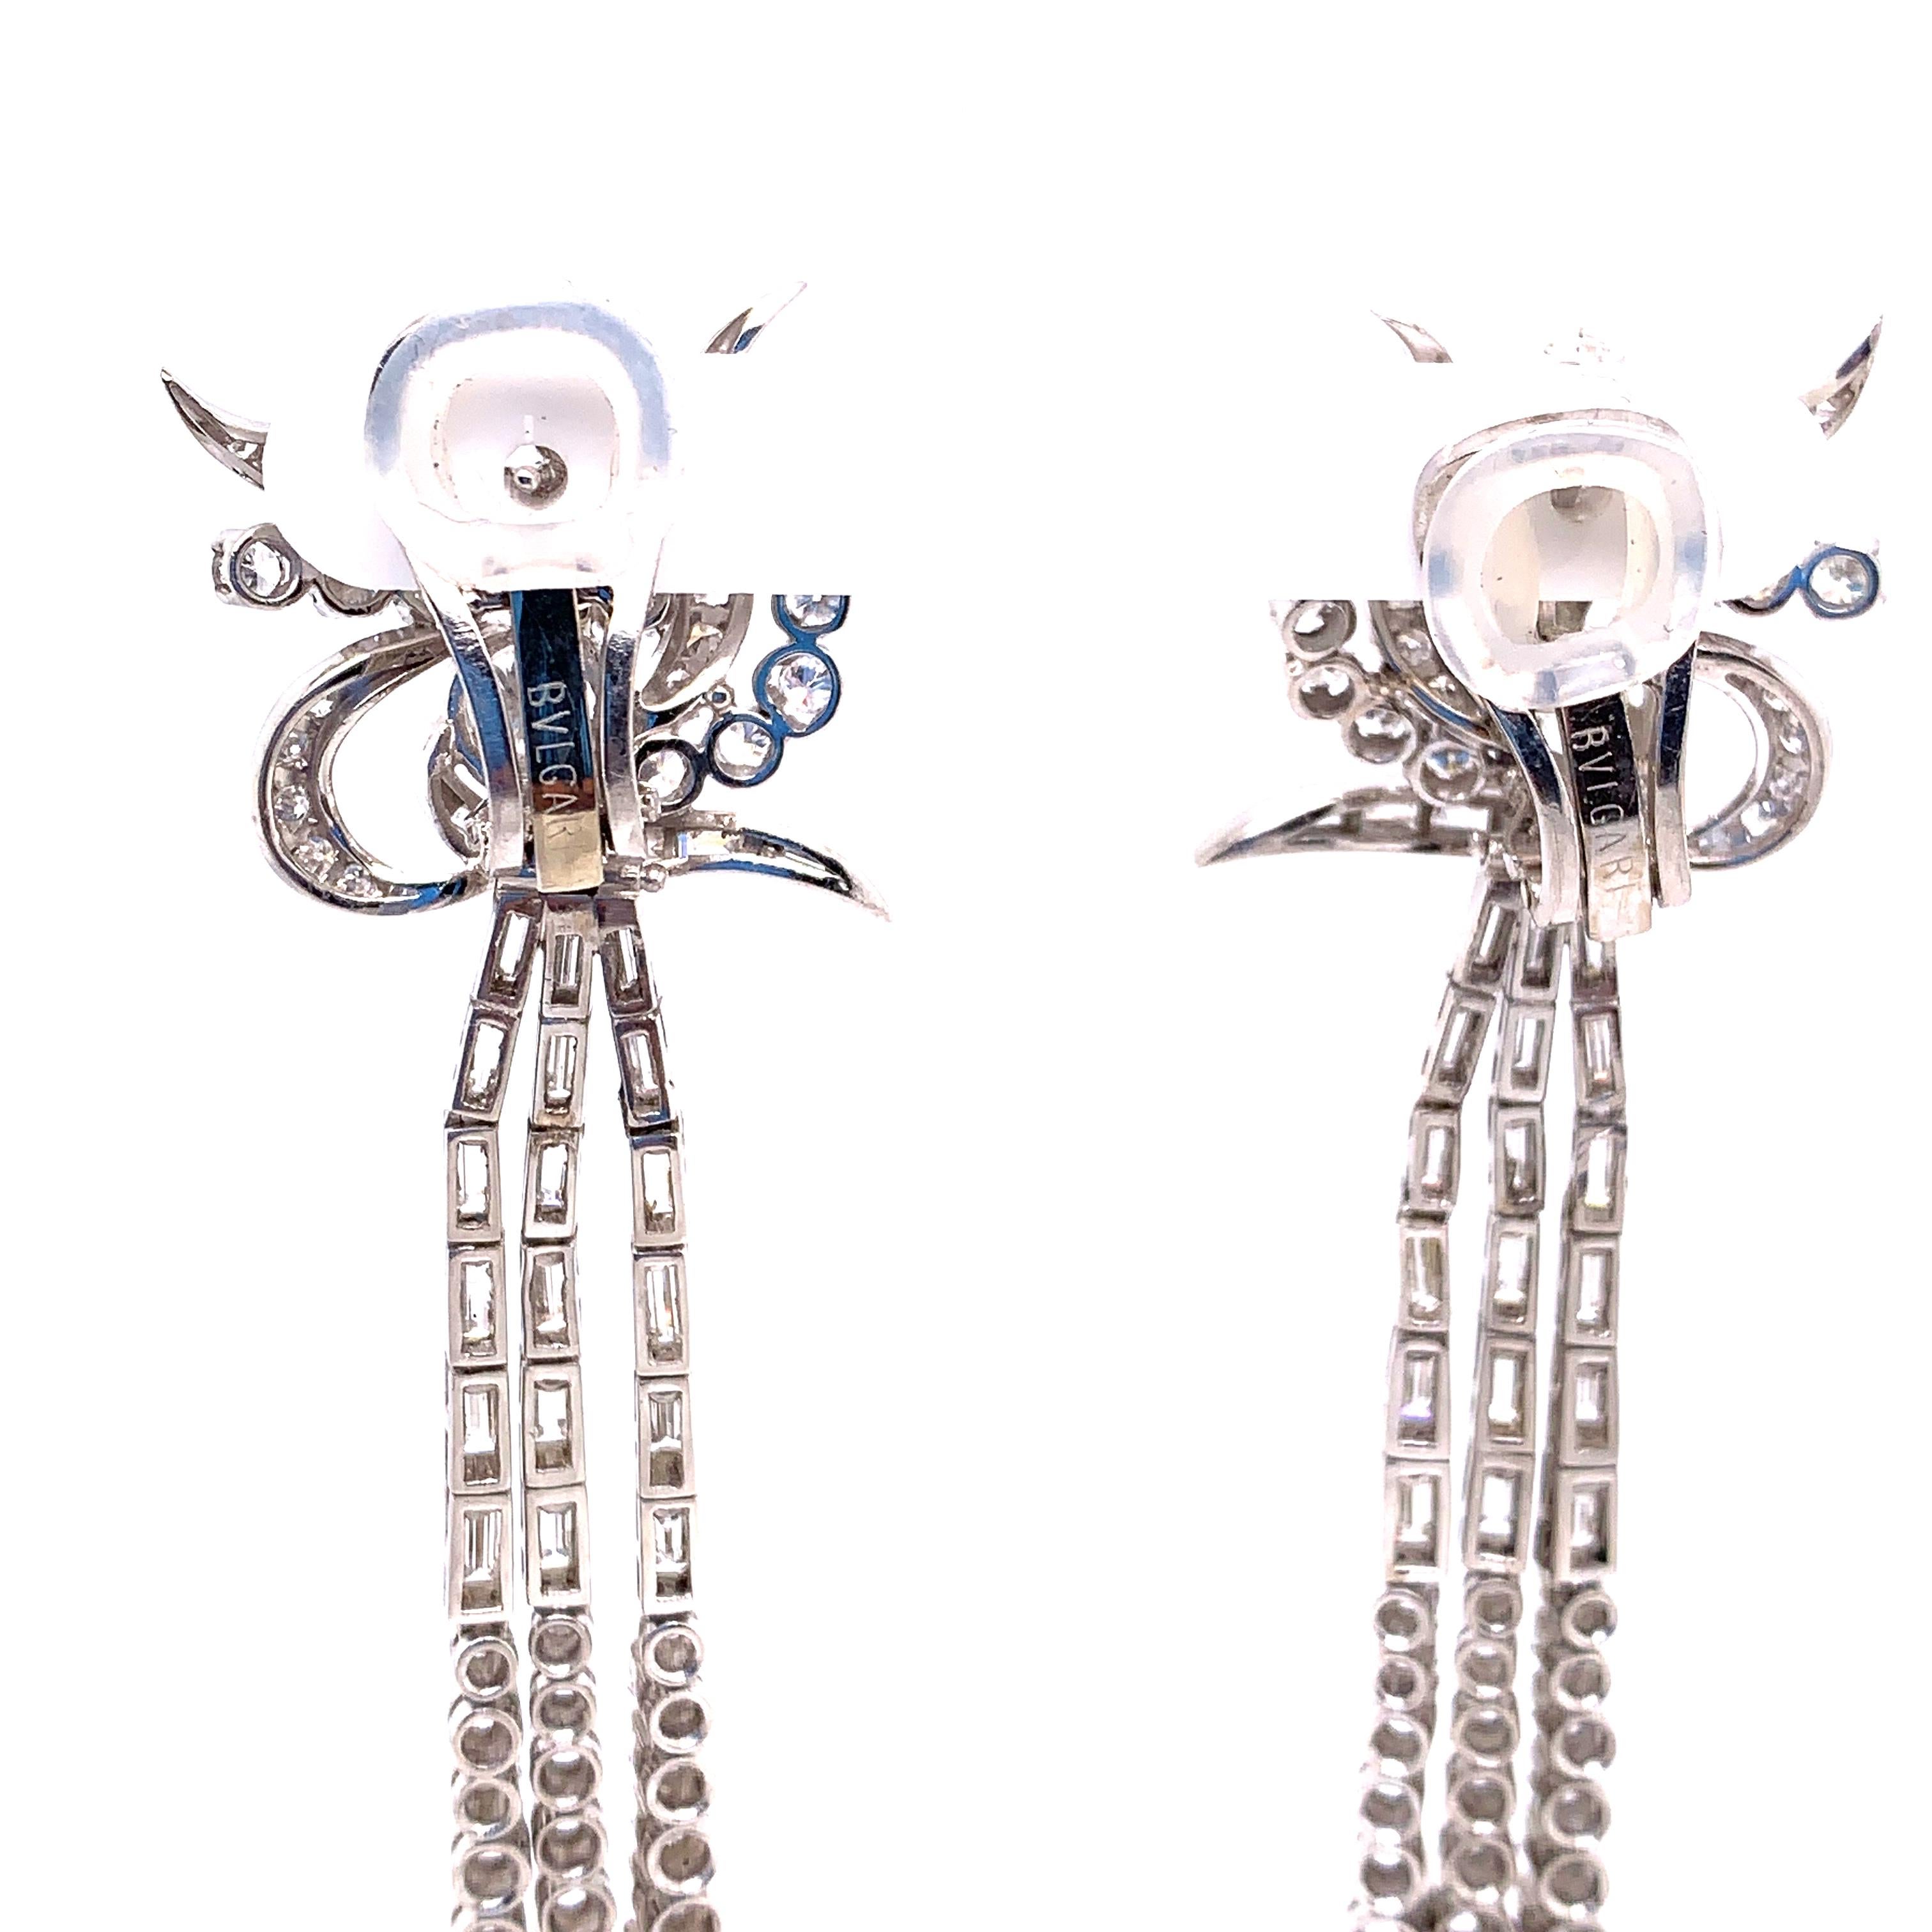 These Vintage BVLGARI chandelier earrings are comprised of approximately 168 White diamonds weighing approximately 11 carats.

These authentic and signed BVLGARI earrings are set in Platinum. A classic & timeless look from one of the the Jewelry